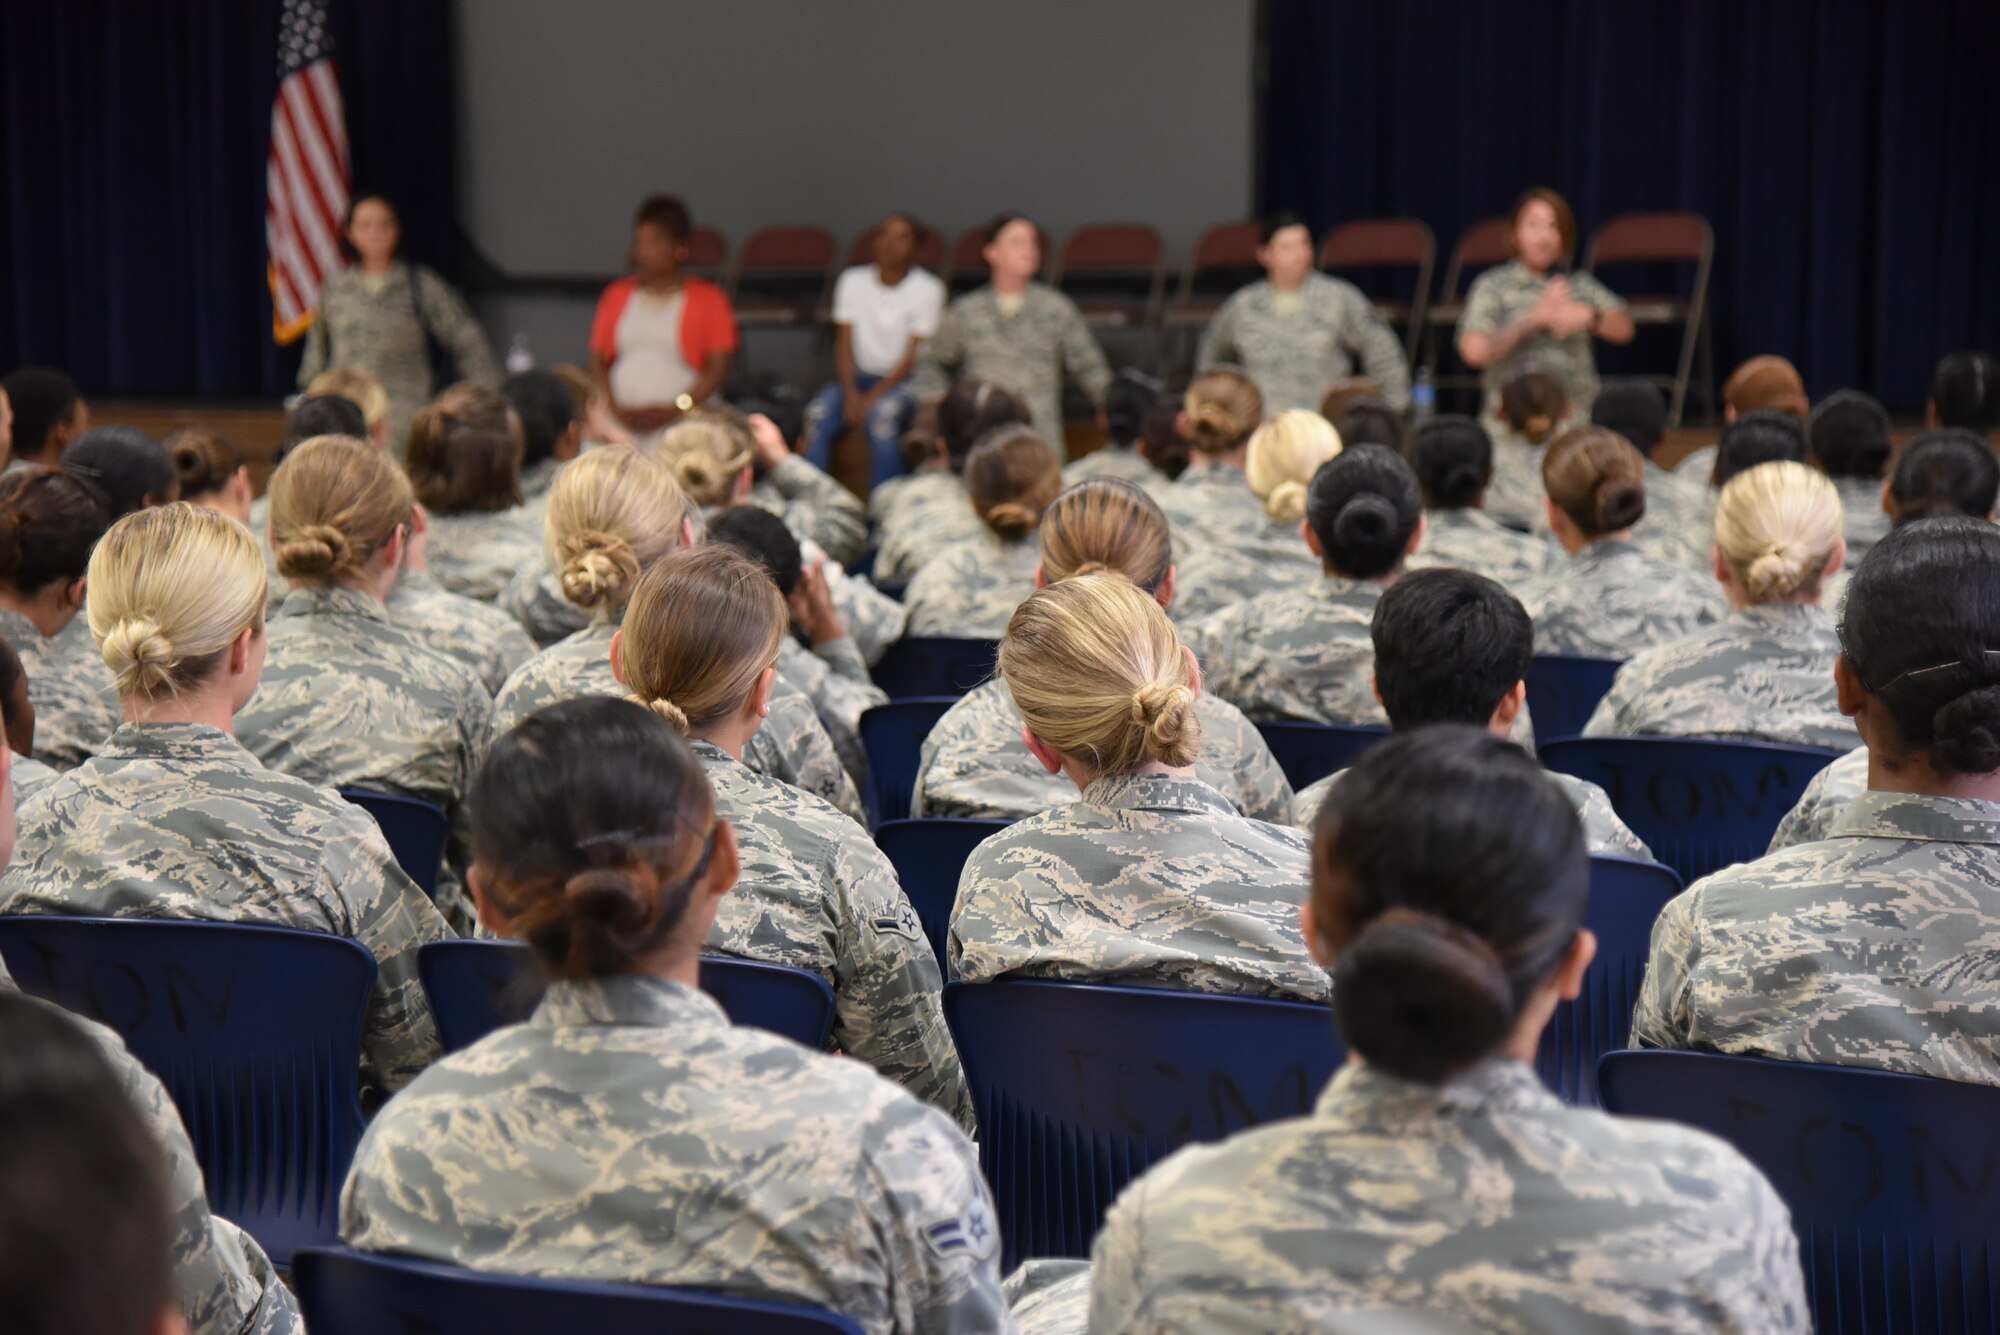 More than 250 female Airmen fill the Community Activity Center for the first ever 82nd Training Wing Female Airmen Forum, May 16, 2017. Five NCO’s and the base’s director of Military Equal Opportunity led an open discussion about being a female in the Air Force. (U.S. Air Force photo by 2nd Lt. Jacqueline Jastrzebski)